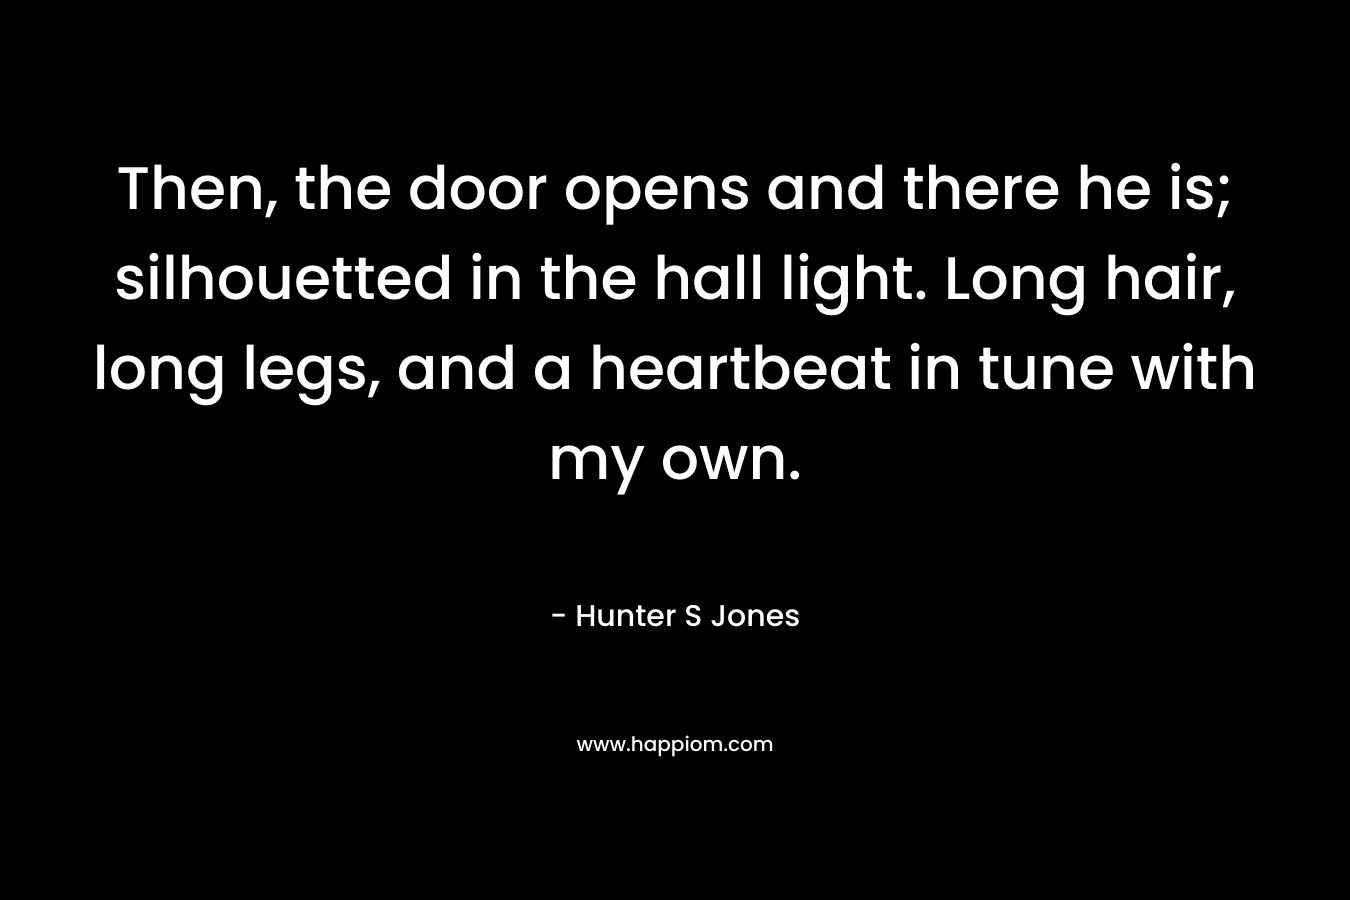 Then, the door opens and there he is; silhouetted in the hall light. Long hair, long legs, and a heartbeat in tune with my own. – Hunter S Jones